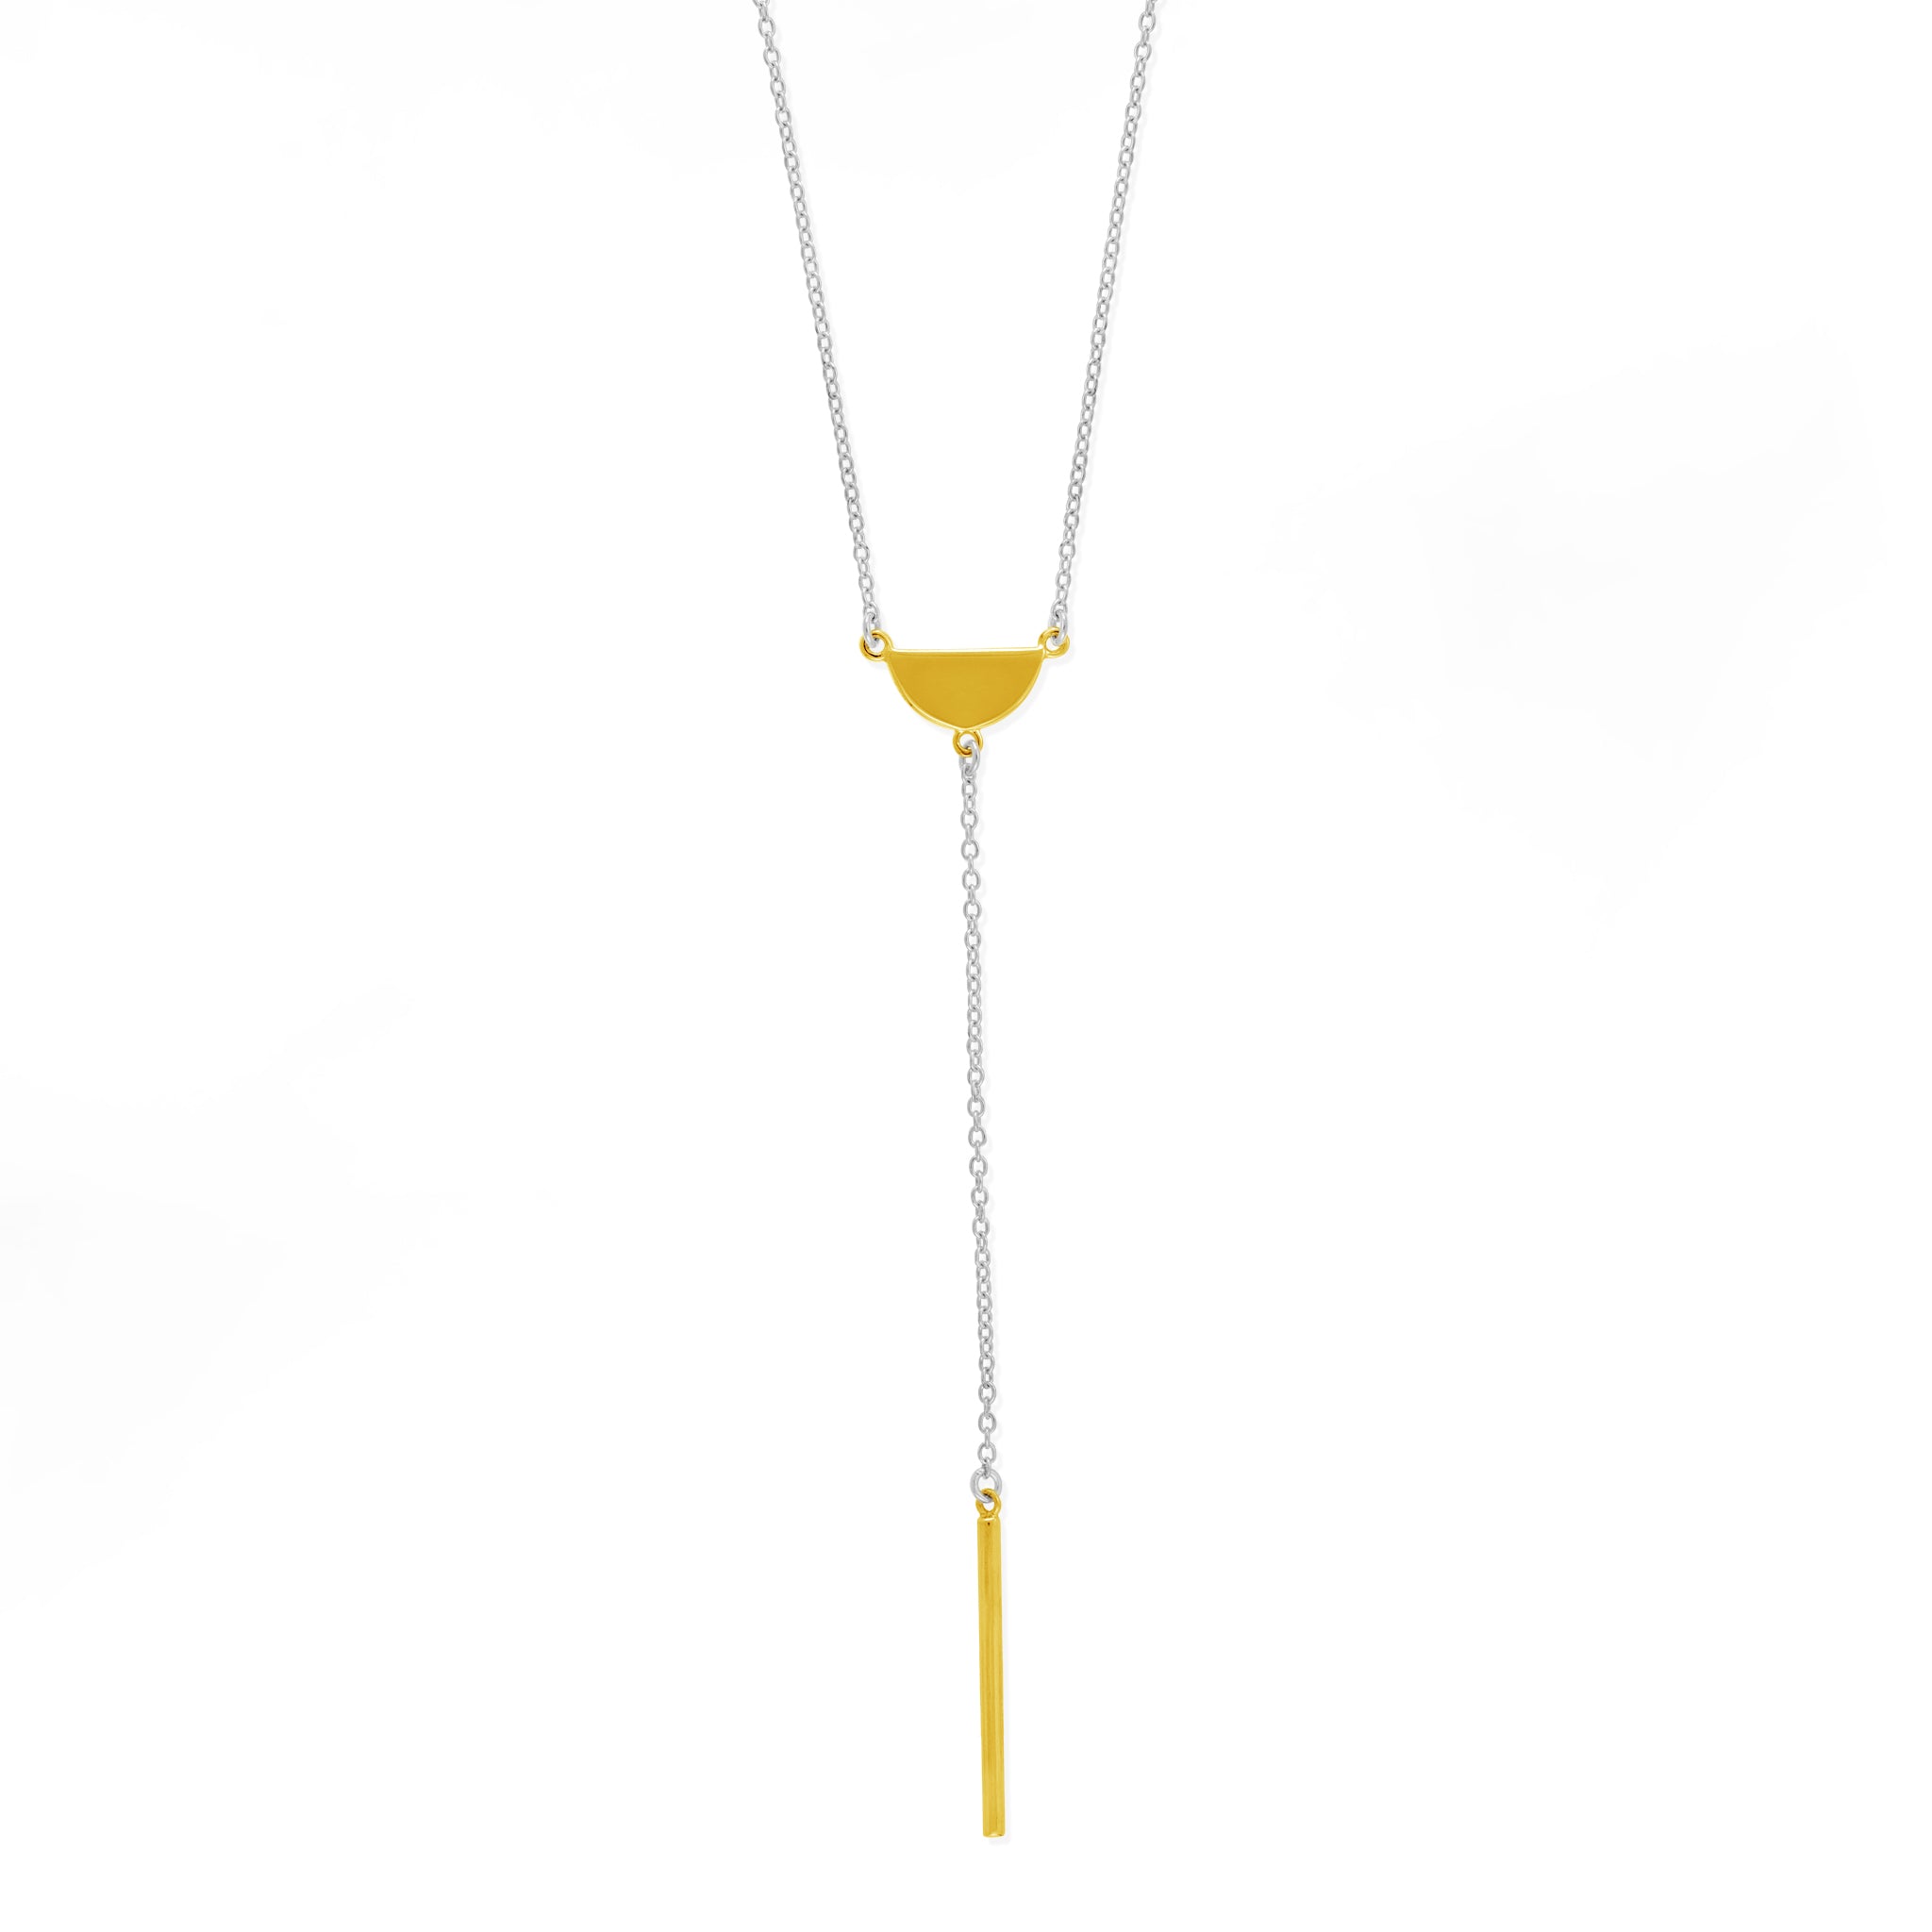 Boma Jewelry Necklaces 14K Gold Vermeil Lariat Necklace